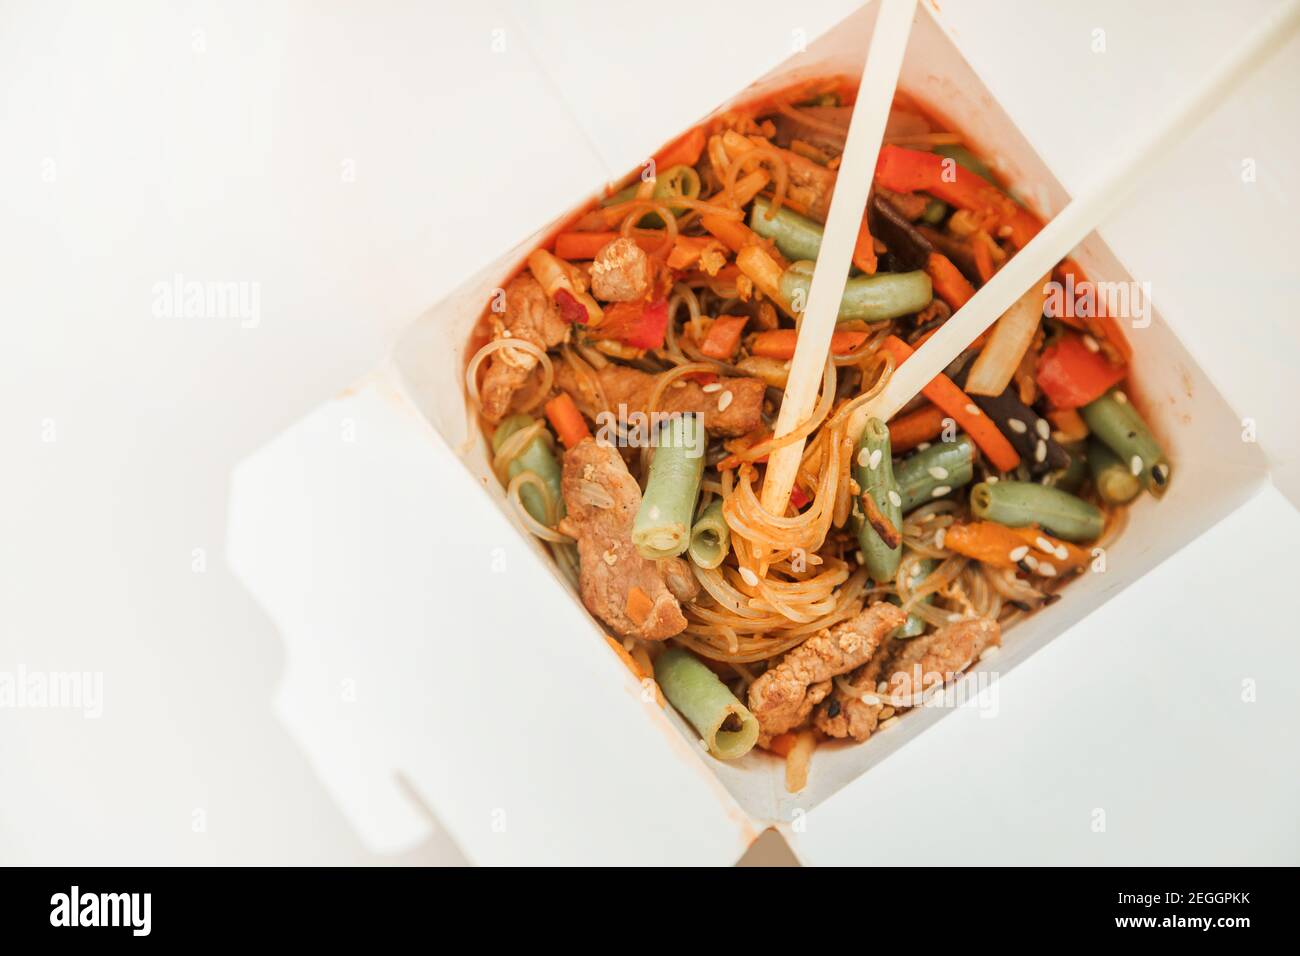 Wok noodles in takeaway box. Wheat noodles with peking duck and vegetables.  Traditional chinese cuisine Stock Photo - Alamy